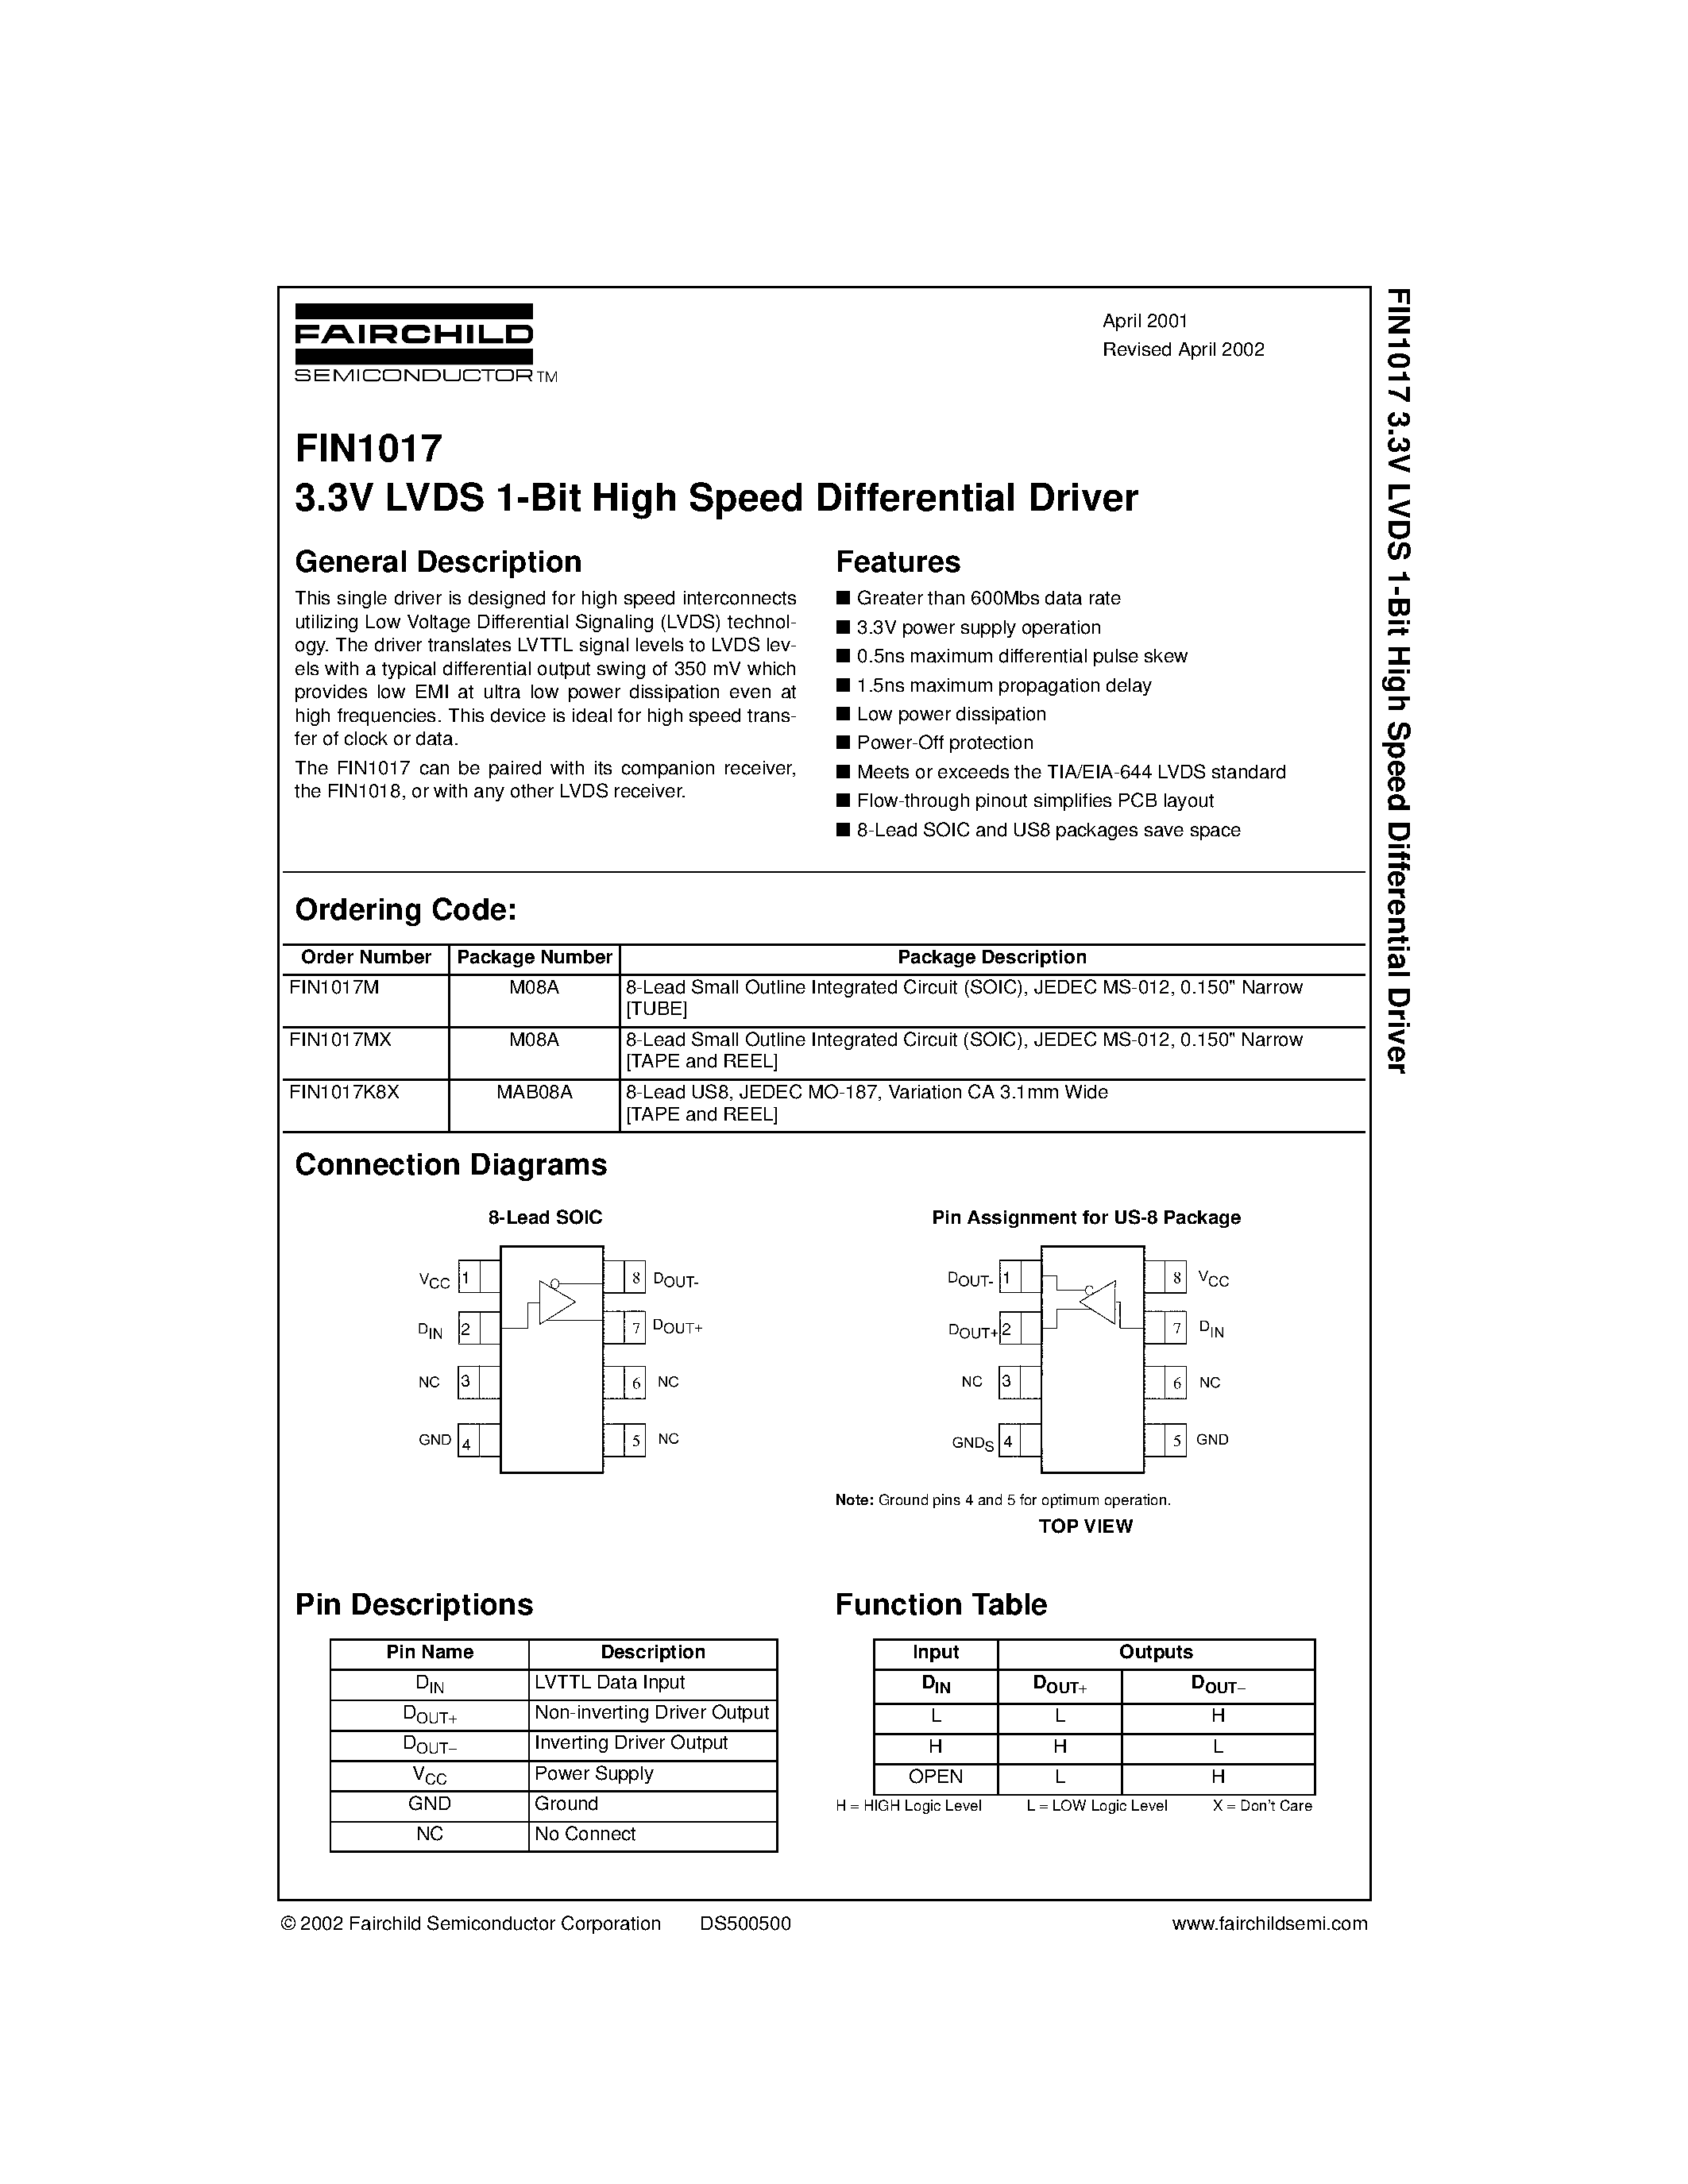 Datasheet FIN1017 - 3.3V LVDS 1-Bit High Speed Differential Driver page 1